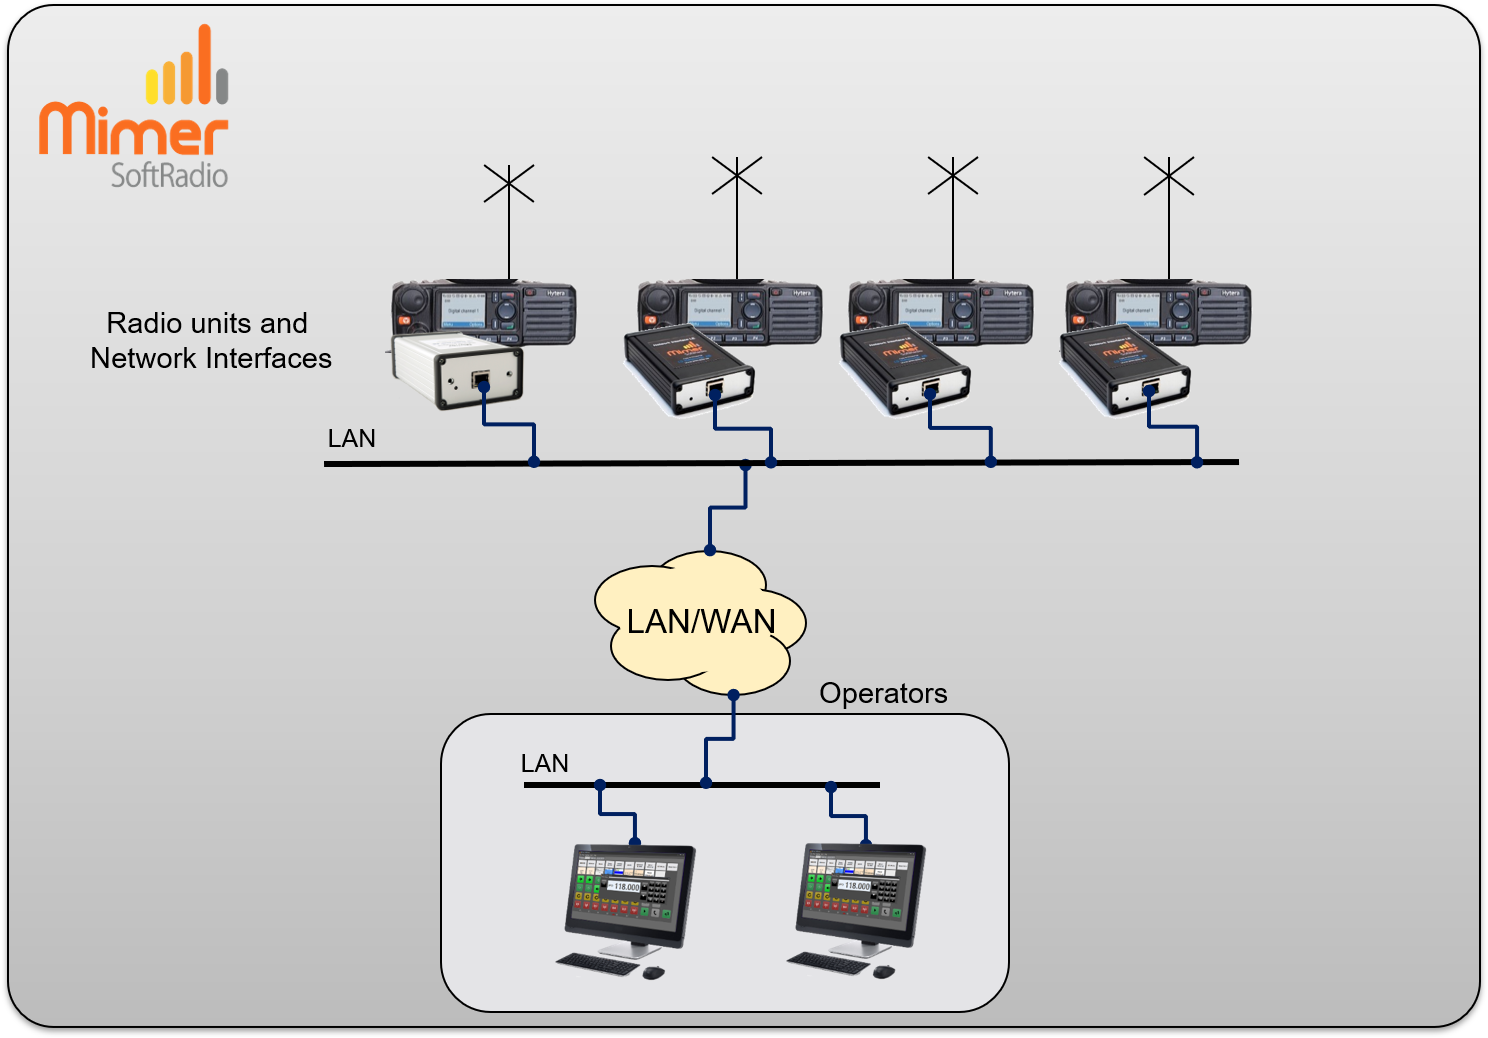 Example with two operators remote controlling both one radio with full VCH and three radios with fixed talkgroup/channel